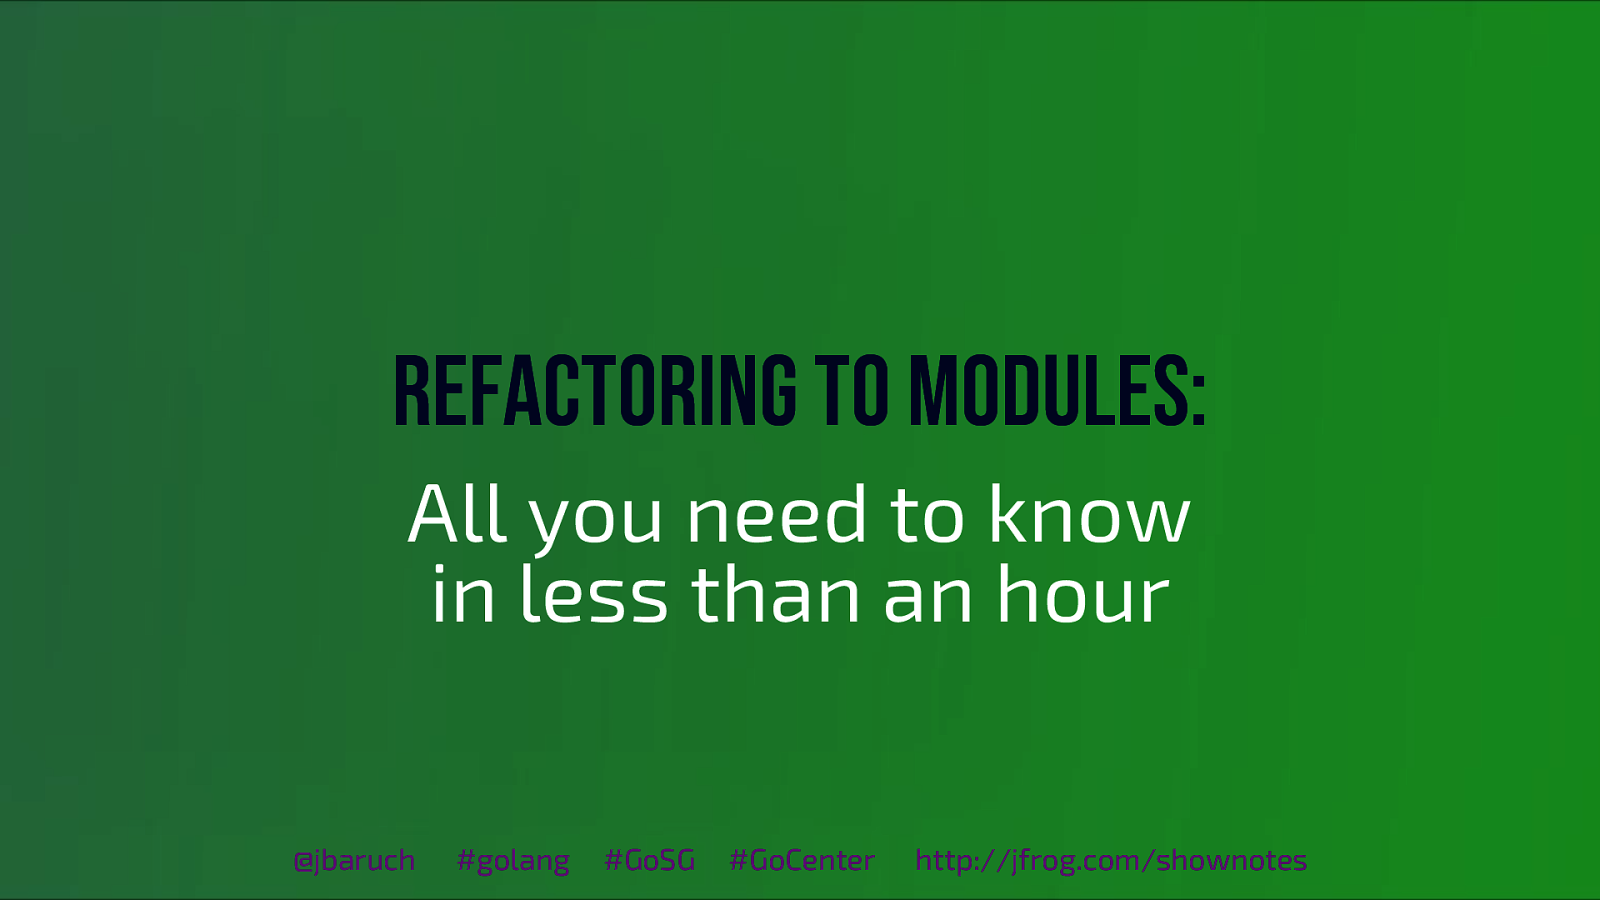 Go Modules: Why and how – all you need to know in less than an hour